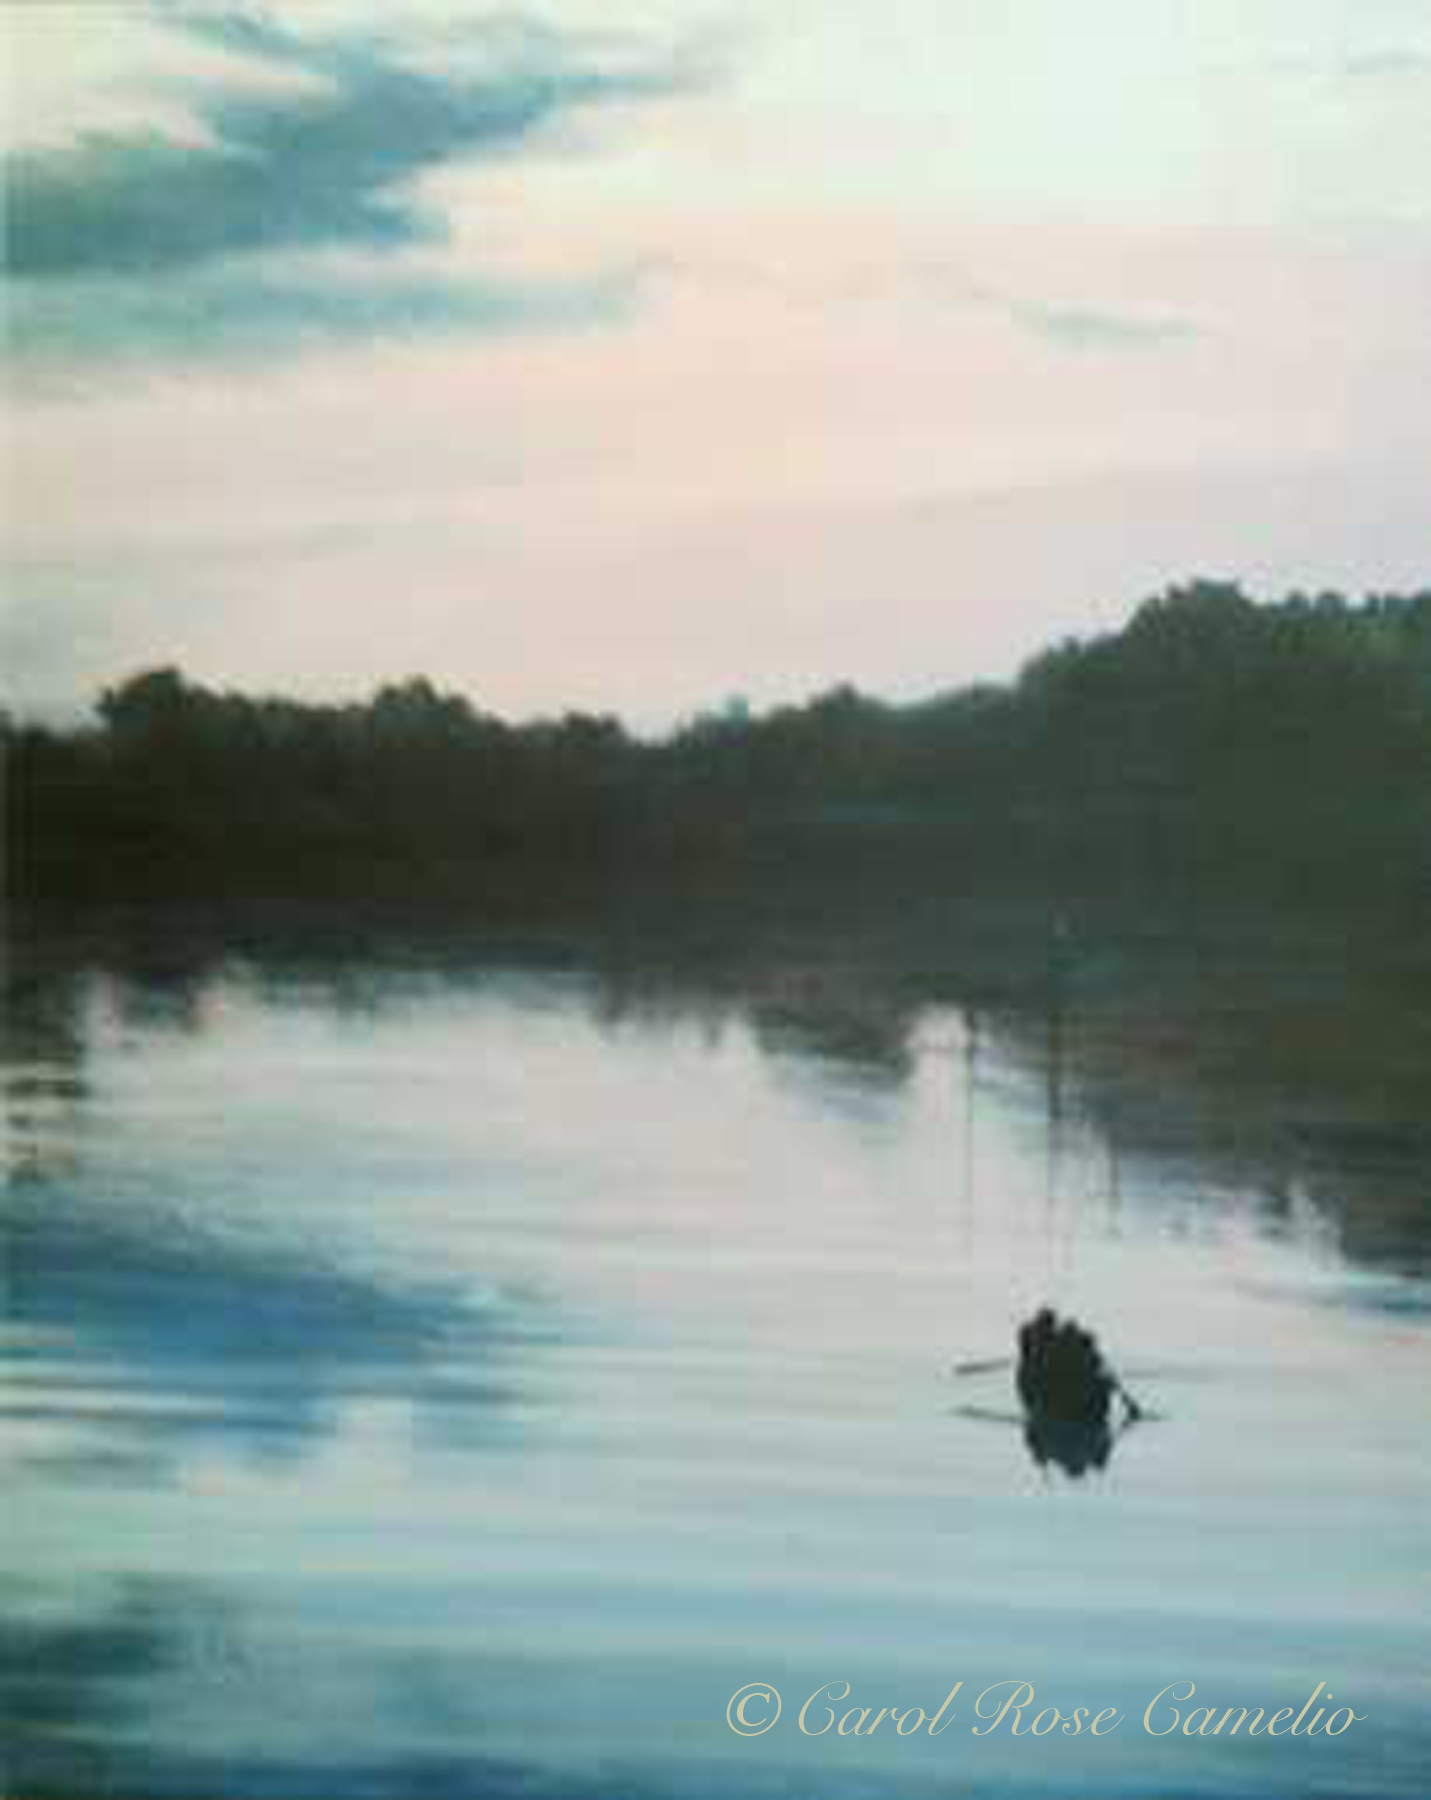 Summer Along the Mystic: A dusk scene of a couple on a lone rowboat, traversing a wide, forested river.